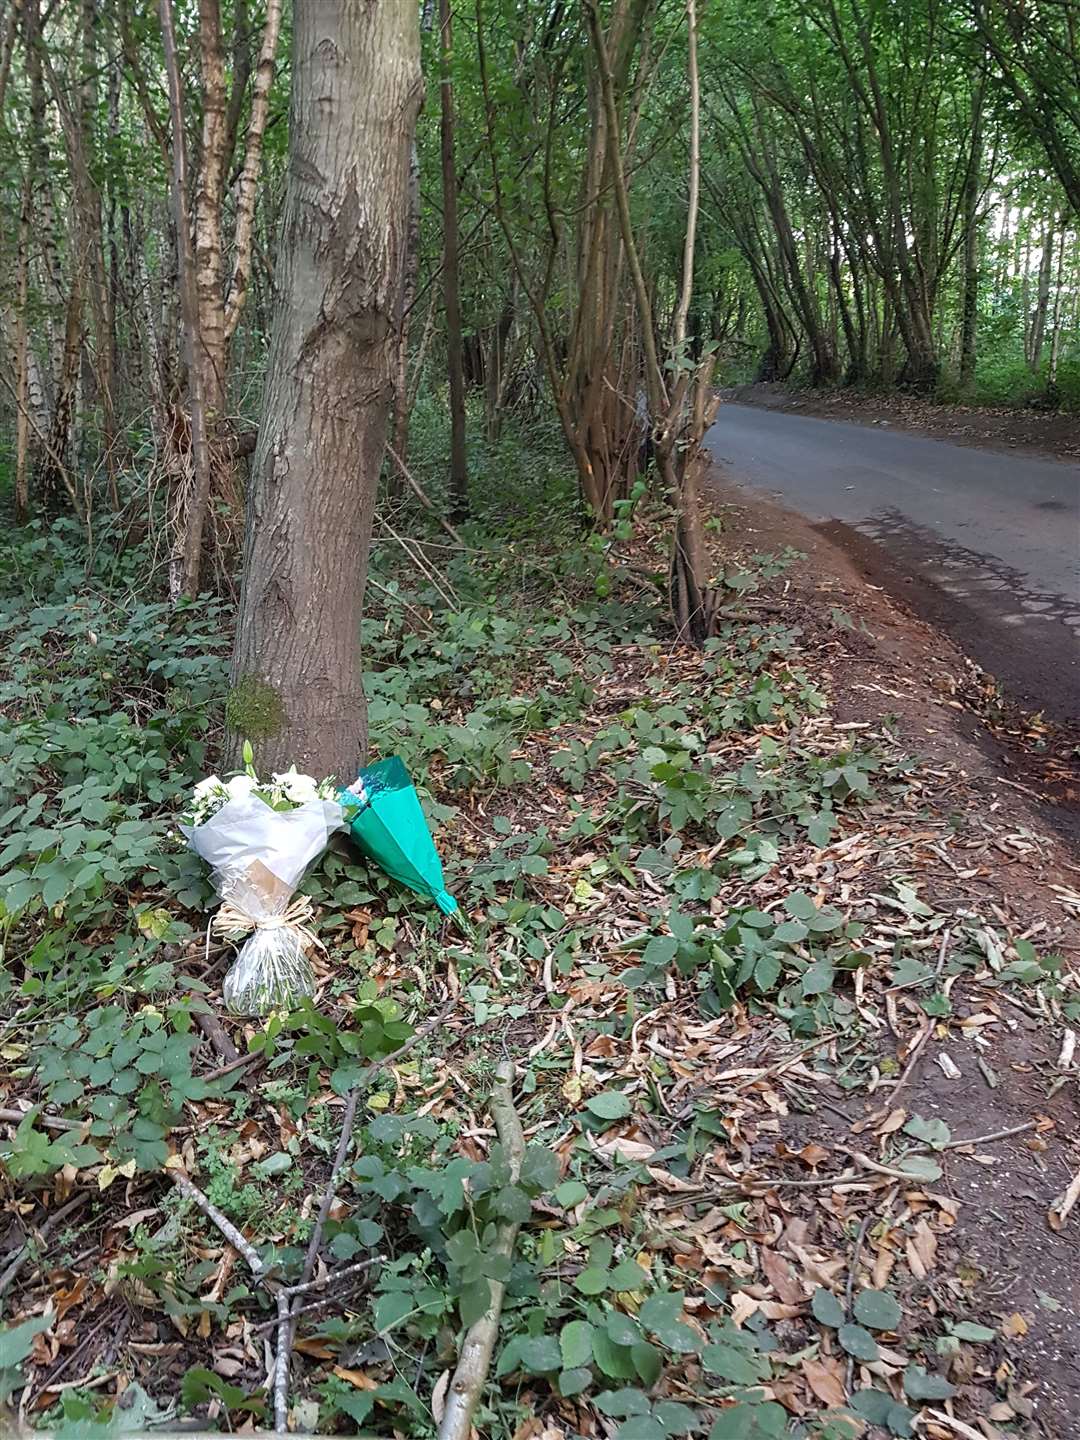 Floral tributes left at the scene of the crash in Kingswood